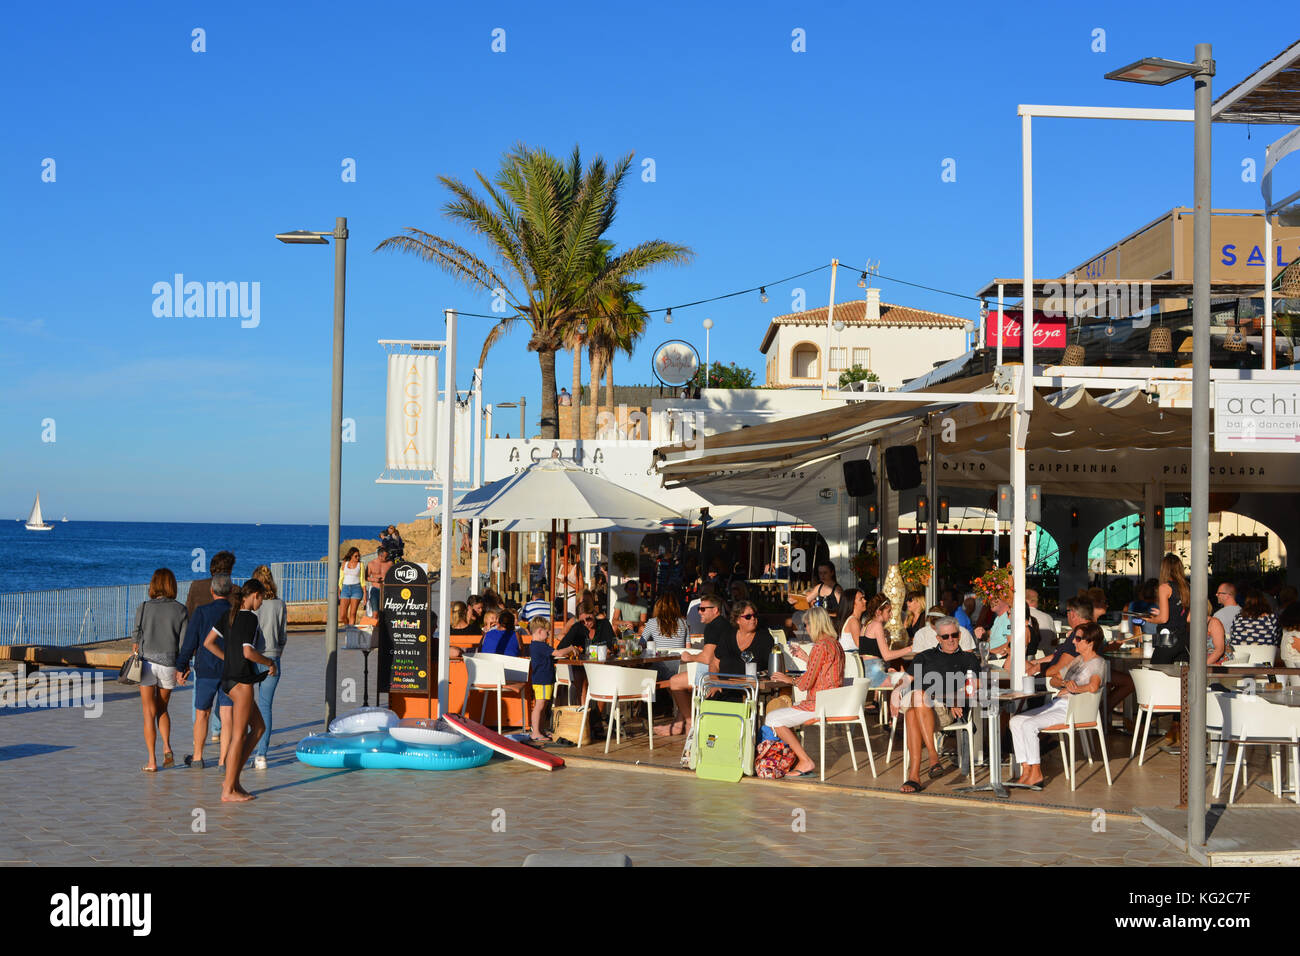 People at Acqua on the Arenal Beach, early evening in October, Javea, Alicante, Spain Stock Photo